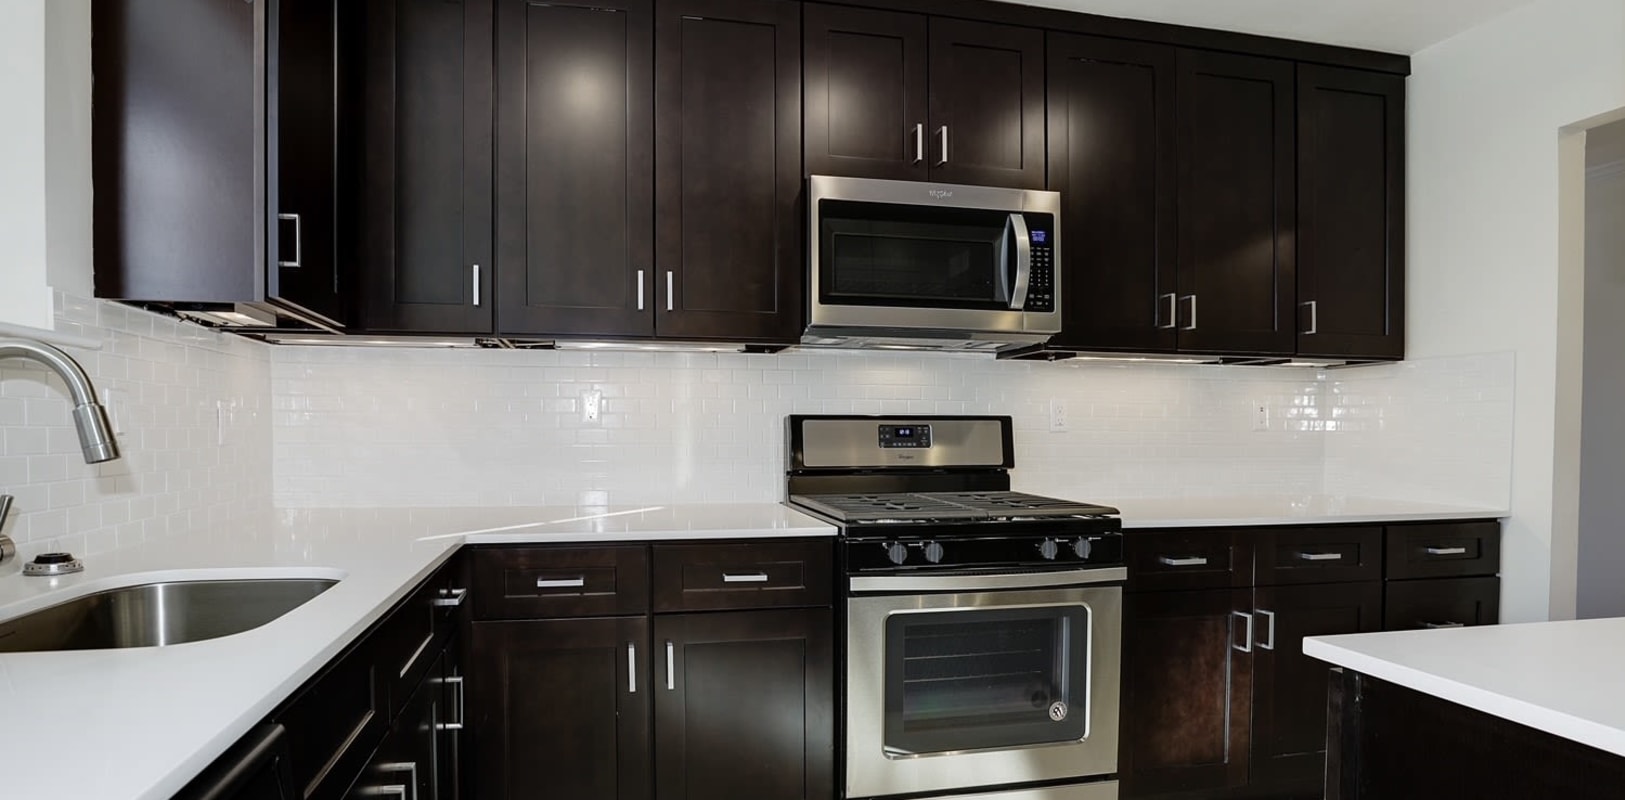 Our kitchens at Blair House in Morristown, New Jersey features stainless steel appliances